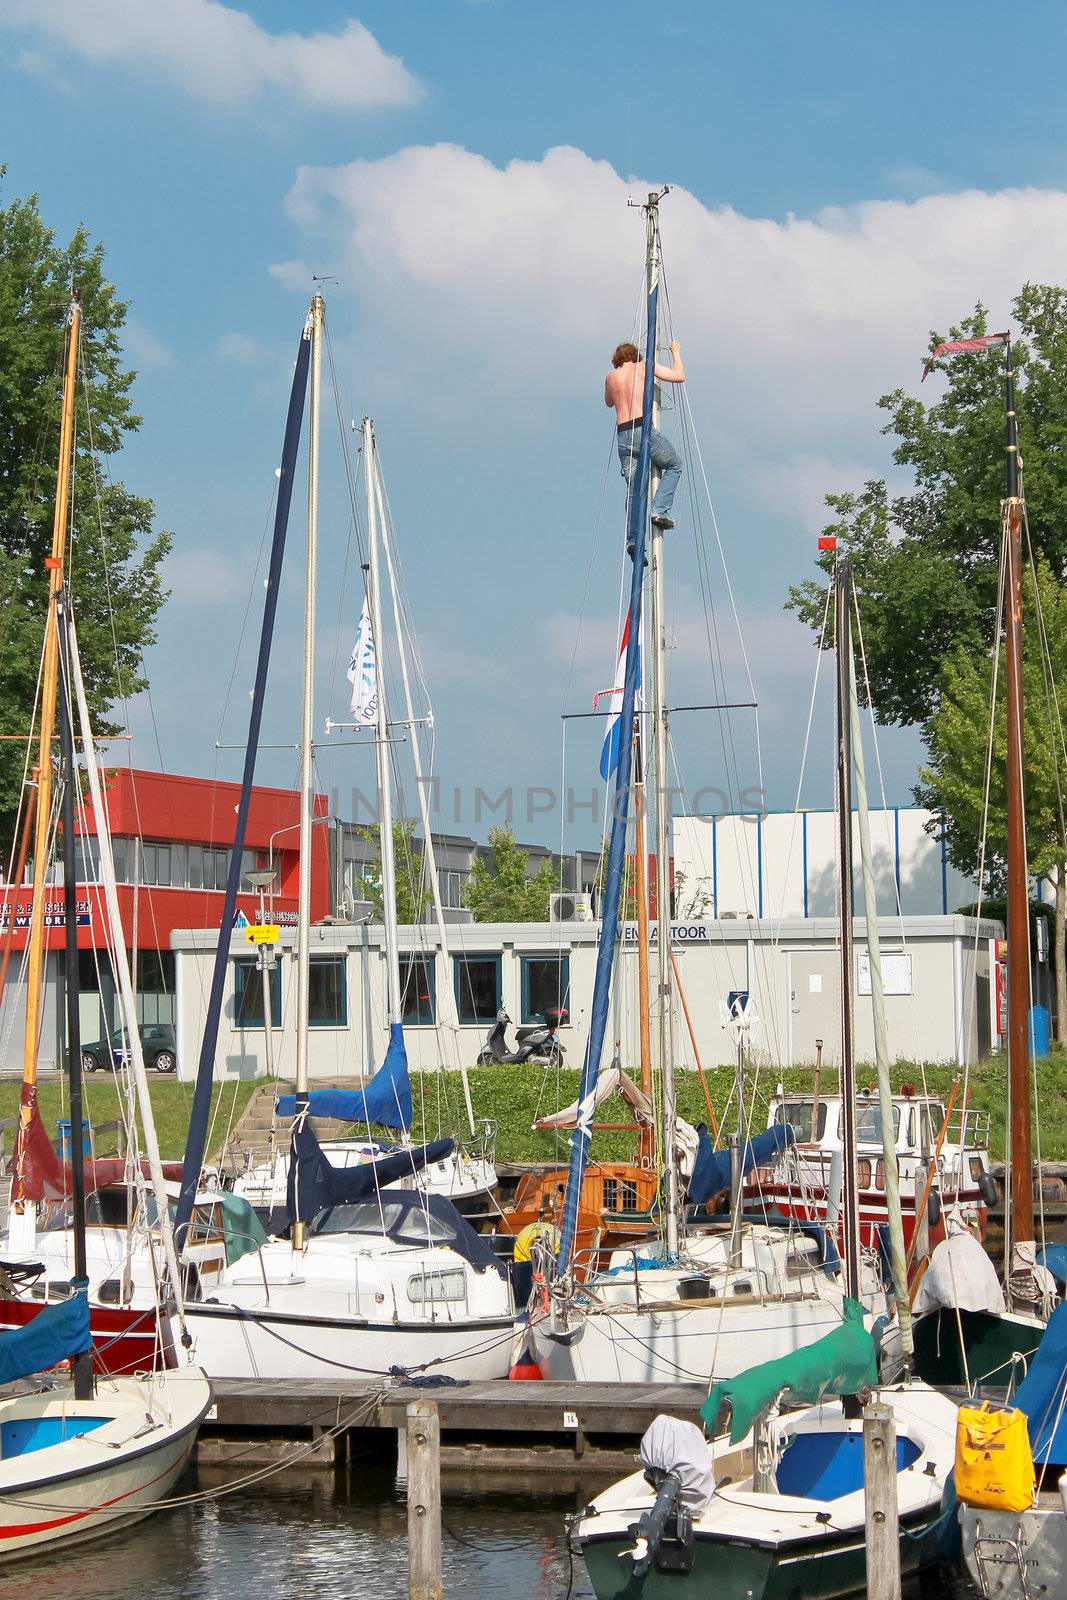 The man at the mast sailing yacht in the port of Huizen. Netherl by NickNick